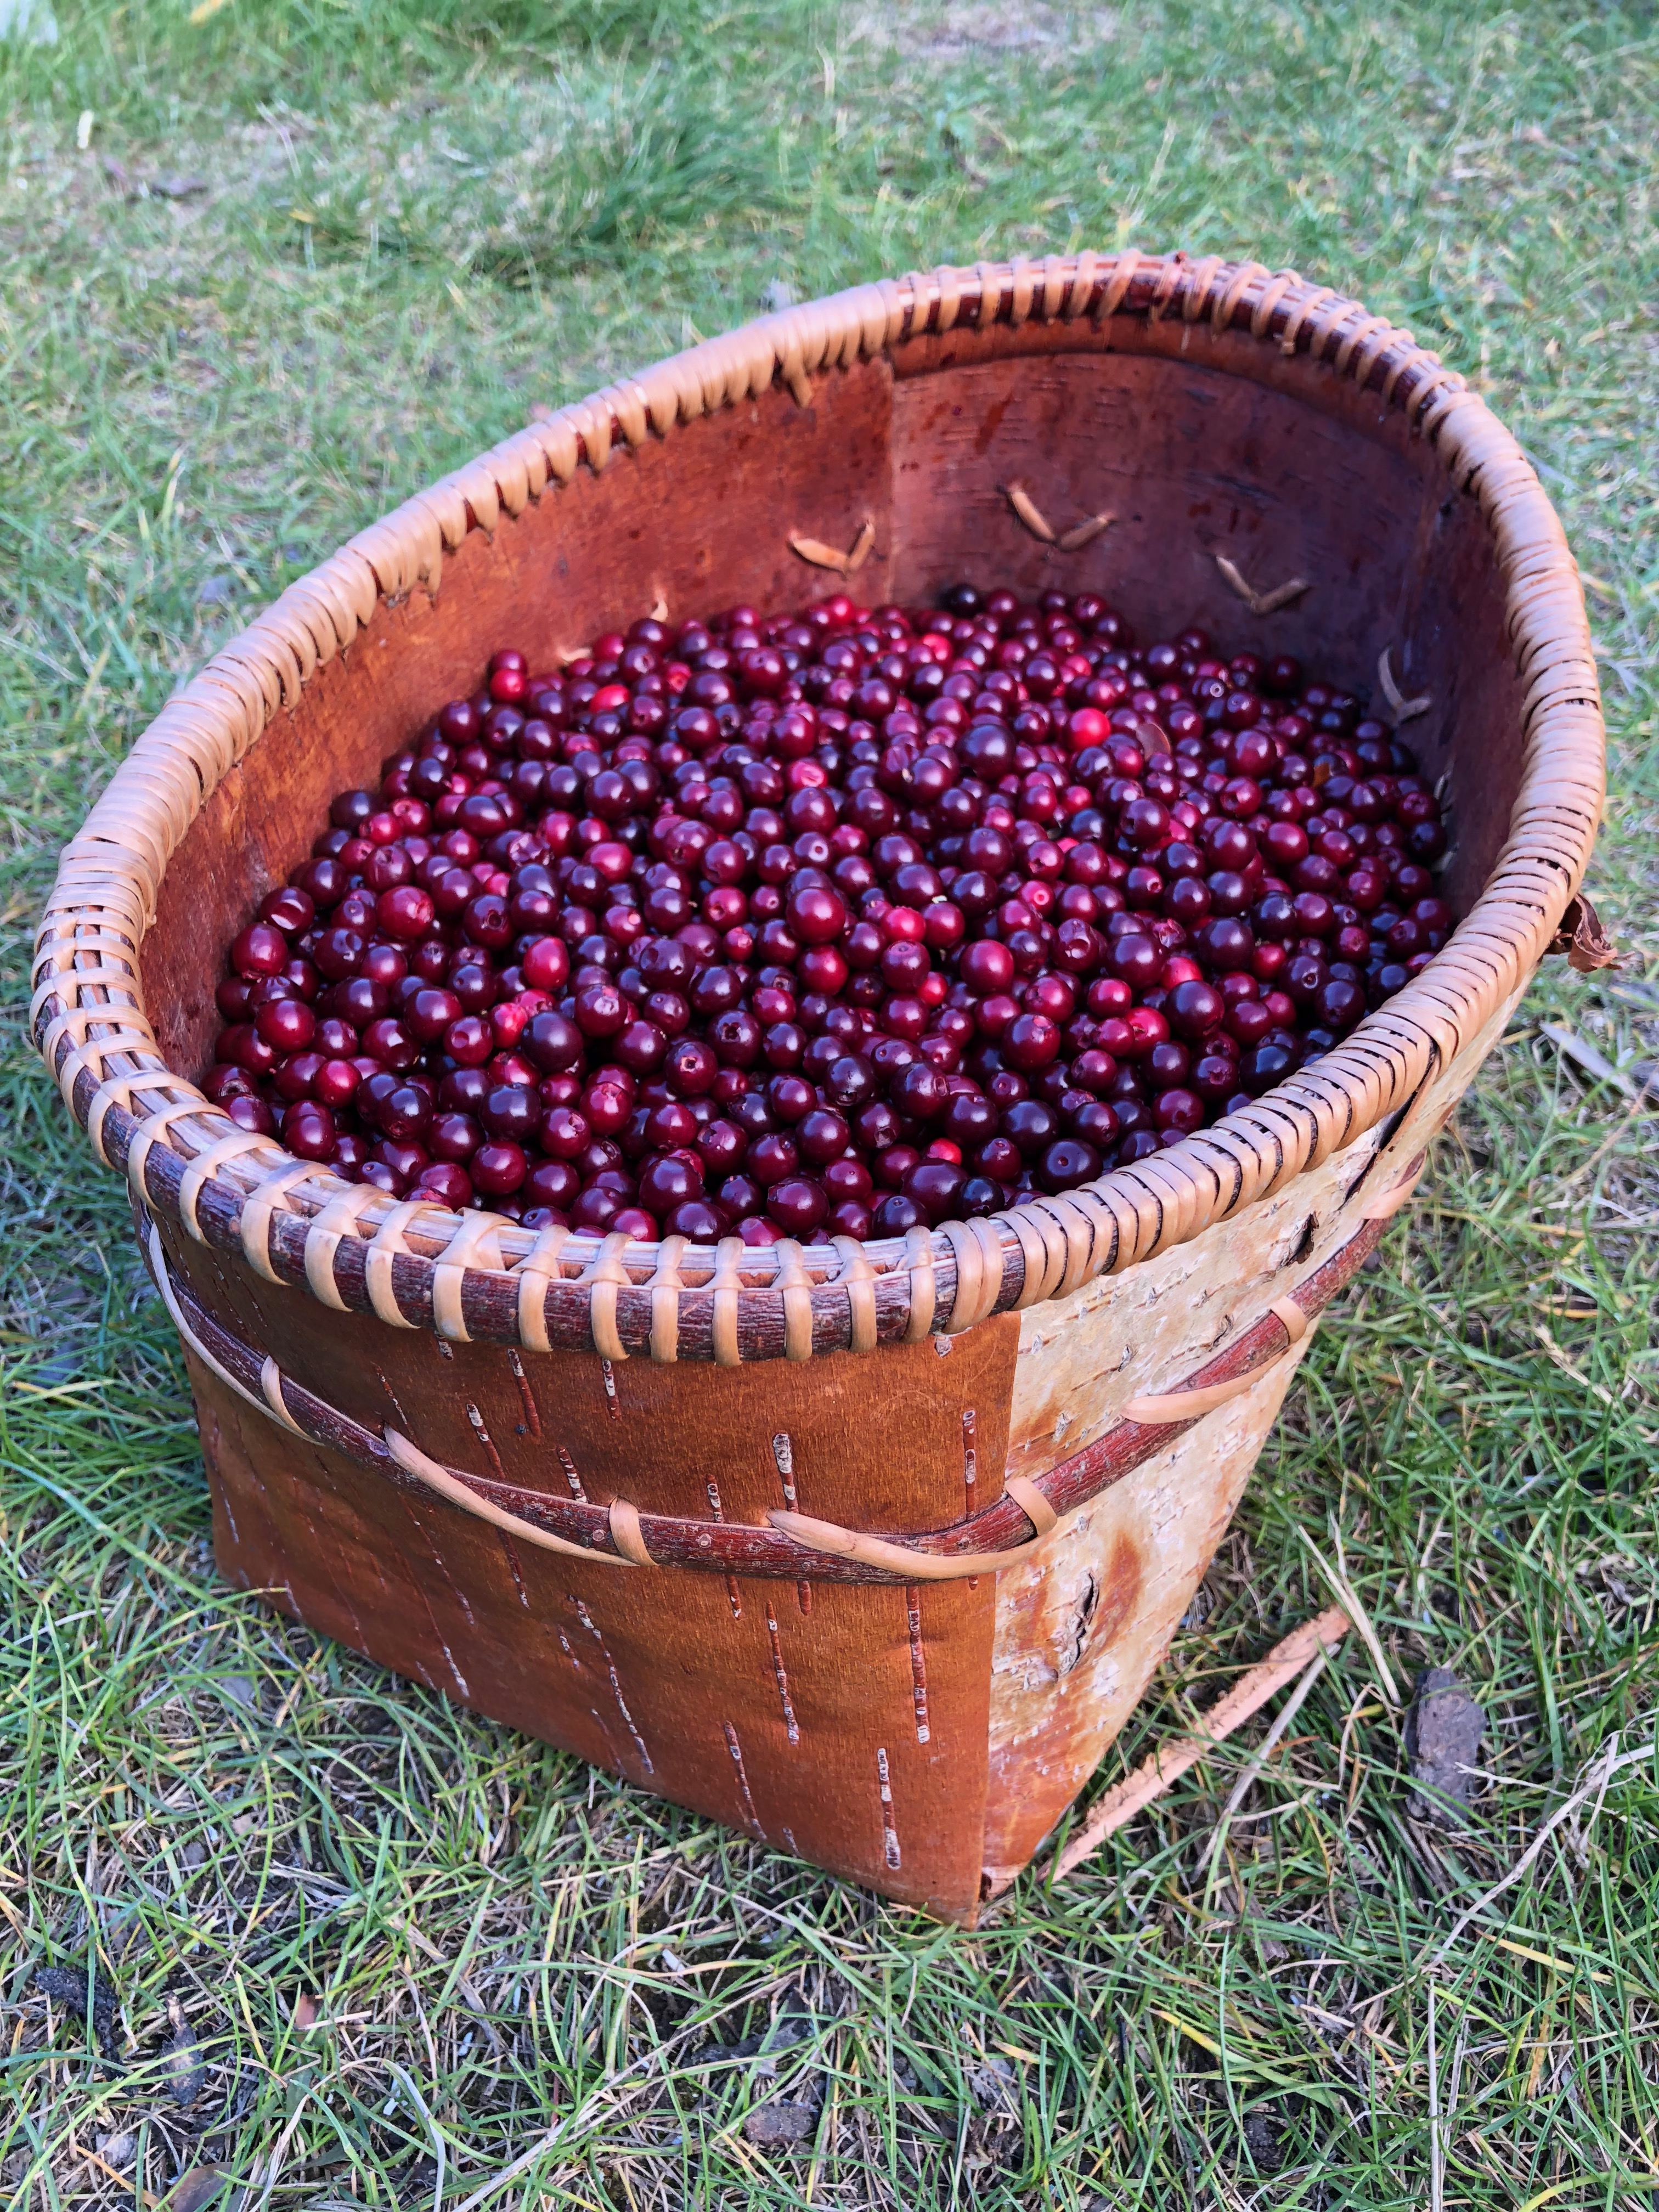 a brown oval shaped basket made of folded, stitched together birch bark is filled with small round red berries